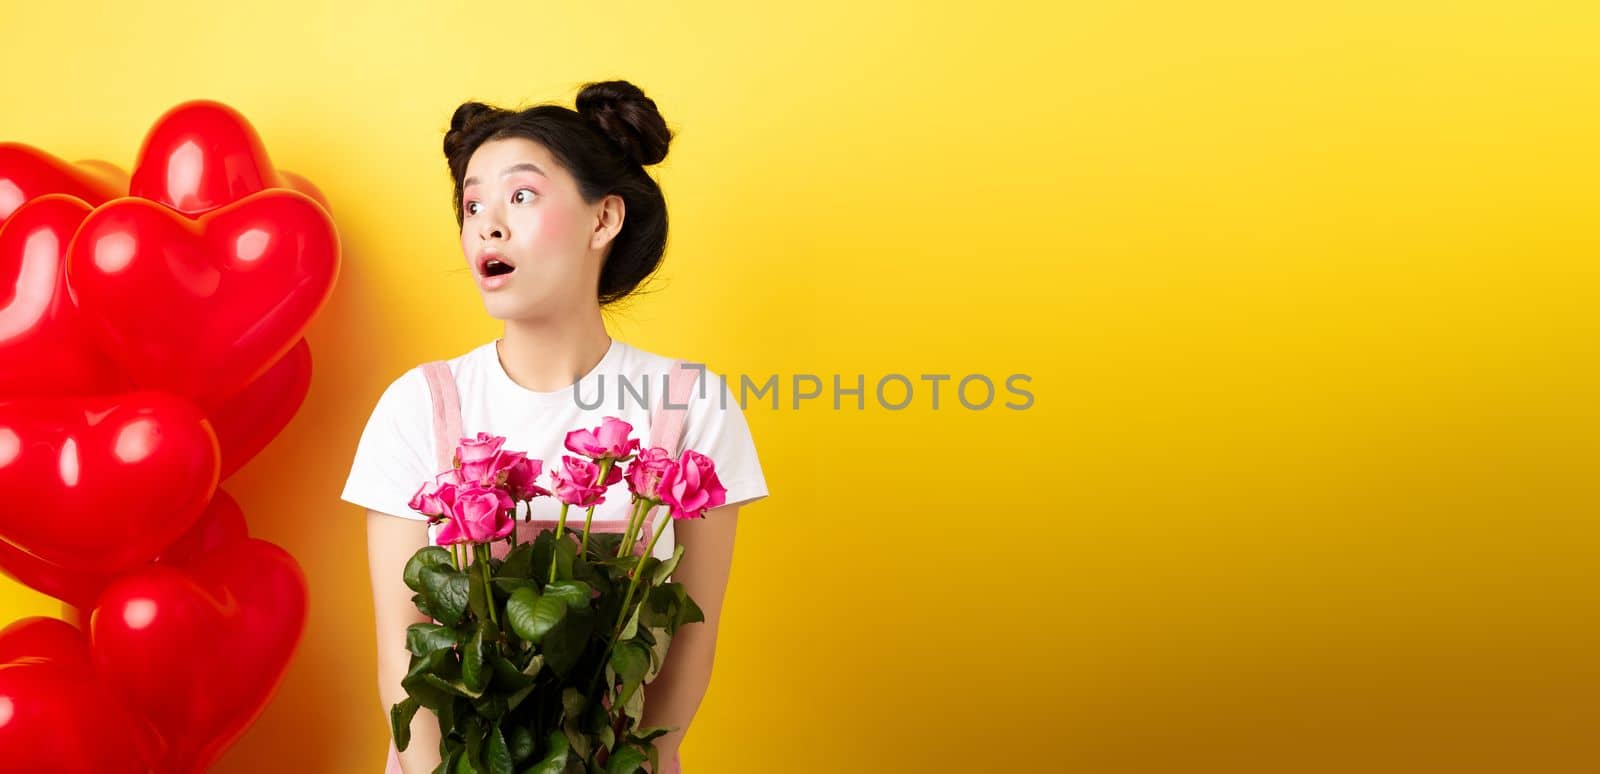 Happy Valentines day. Surprised asian girl looking left with silly face, holding cute pink flowers, receive romantic bouquet, standing on yellow background near red hearts balloons.